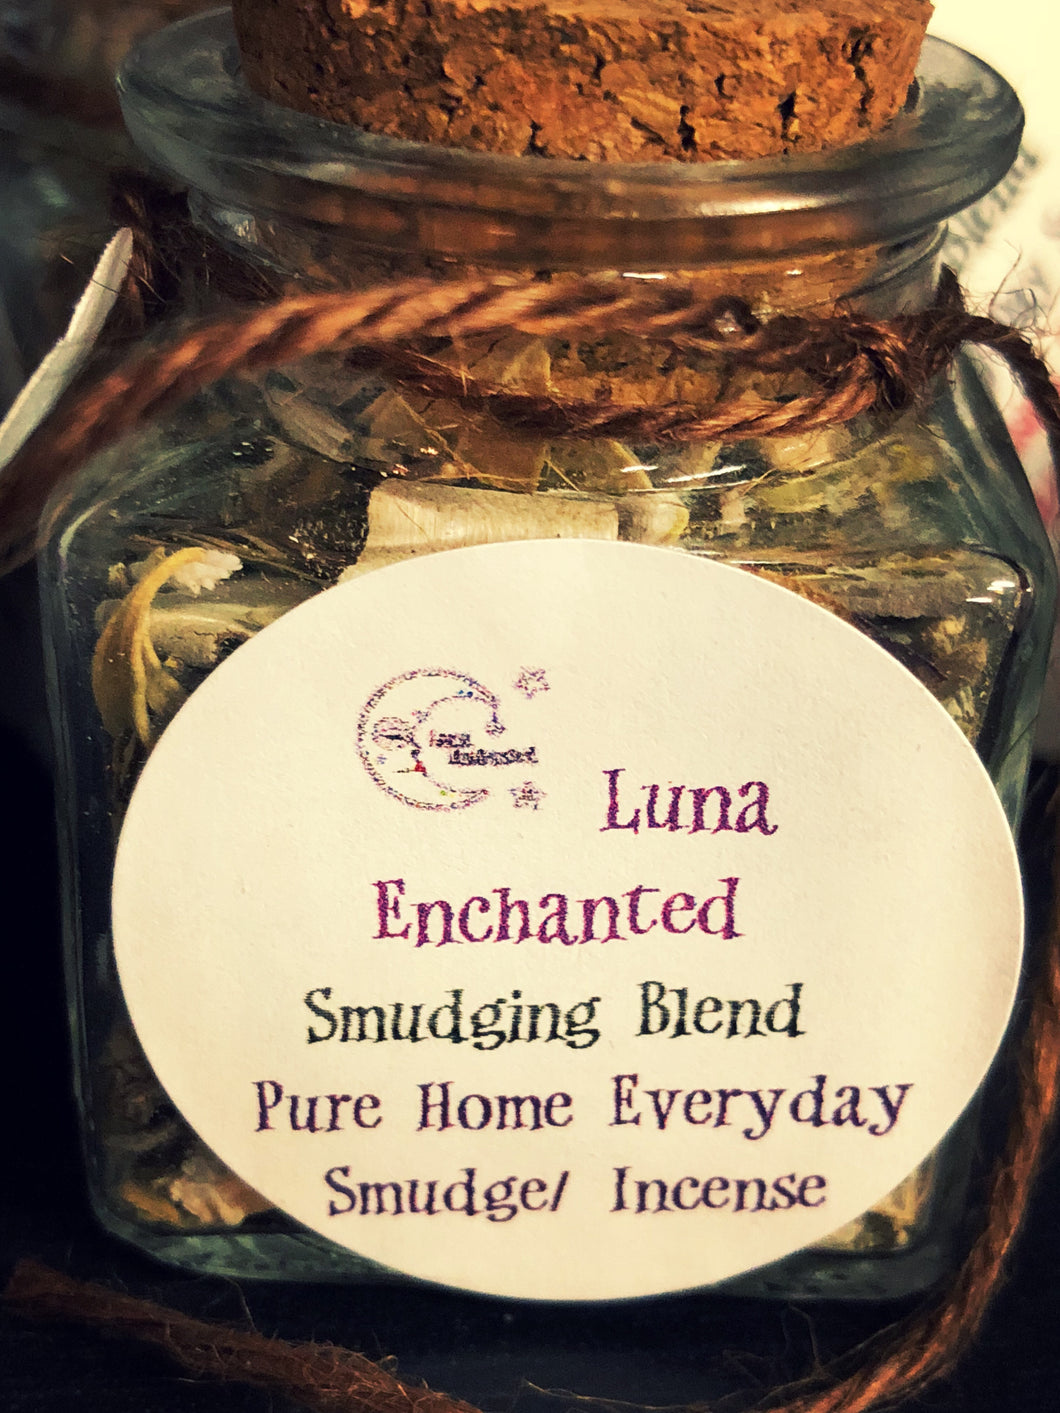 Pure Home Everyday Smudge Incense Blend